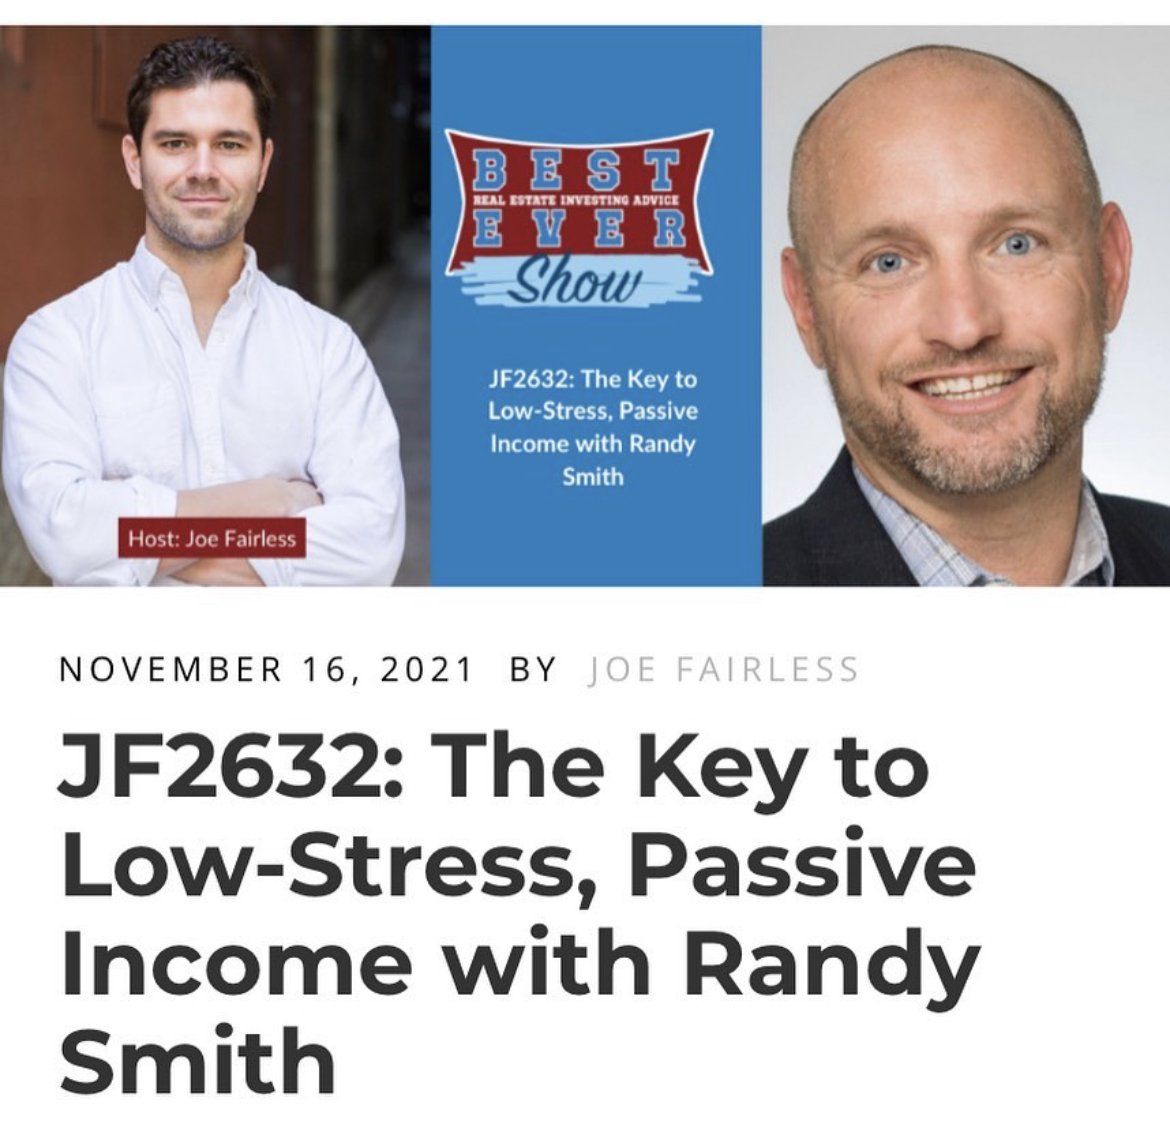 Randy Smith discusses key to low stress passive income